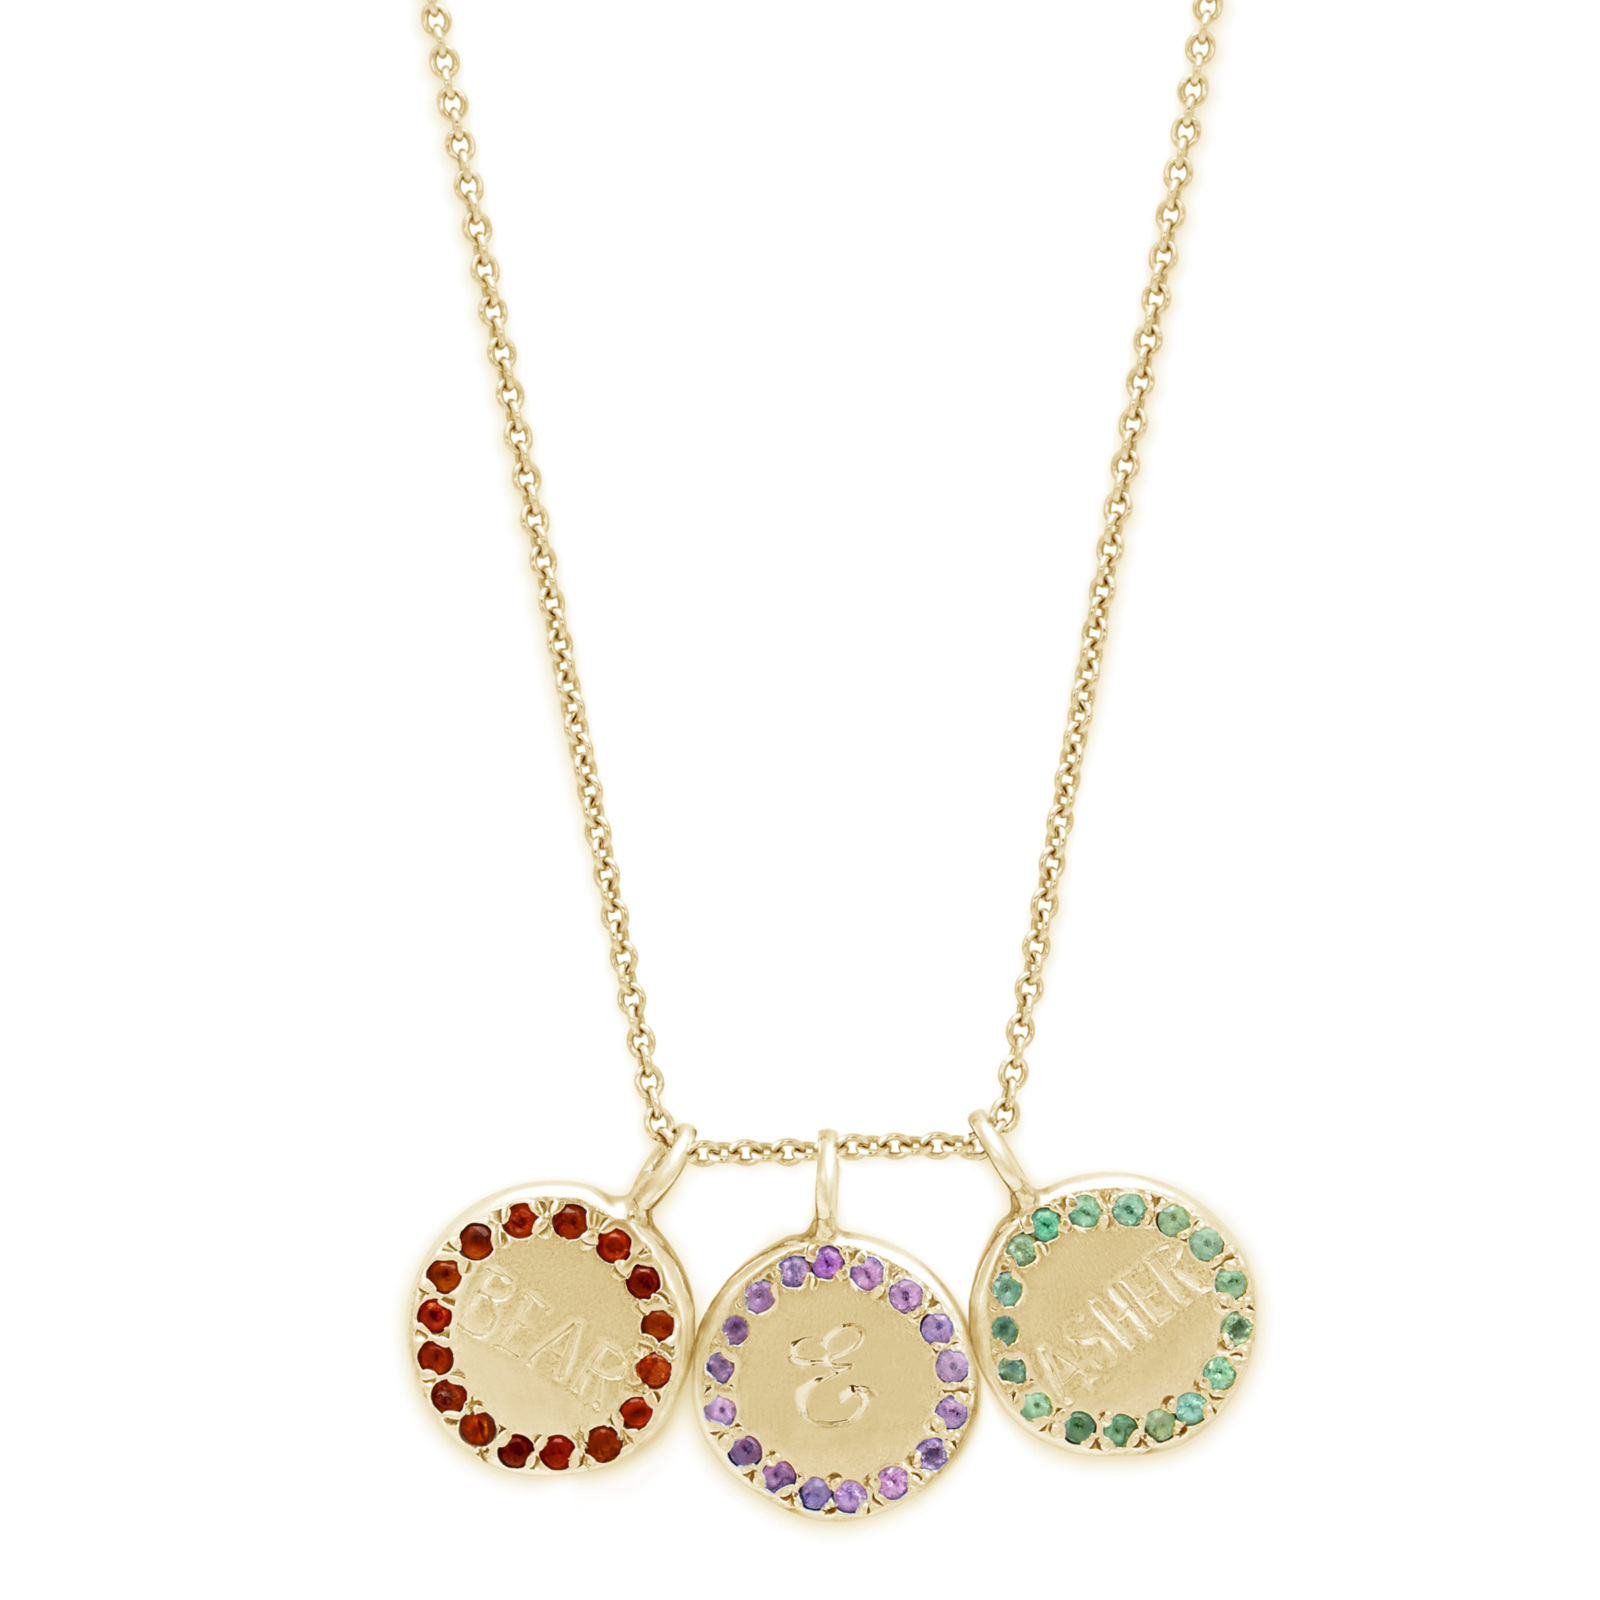 Custom Circle Necklace - Personalized Engraving and choose gemstones - 3 circles in yellow gold